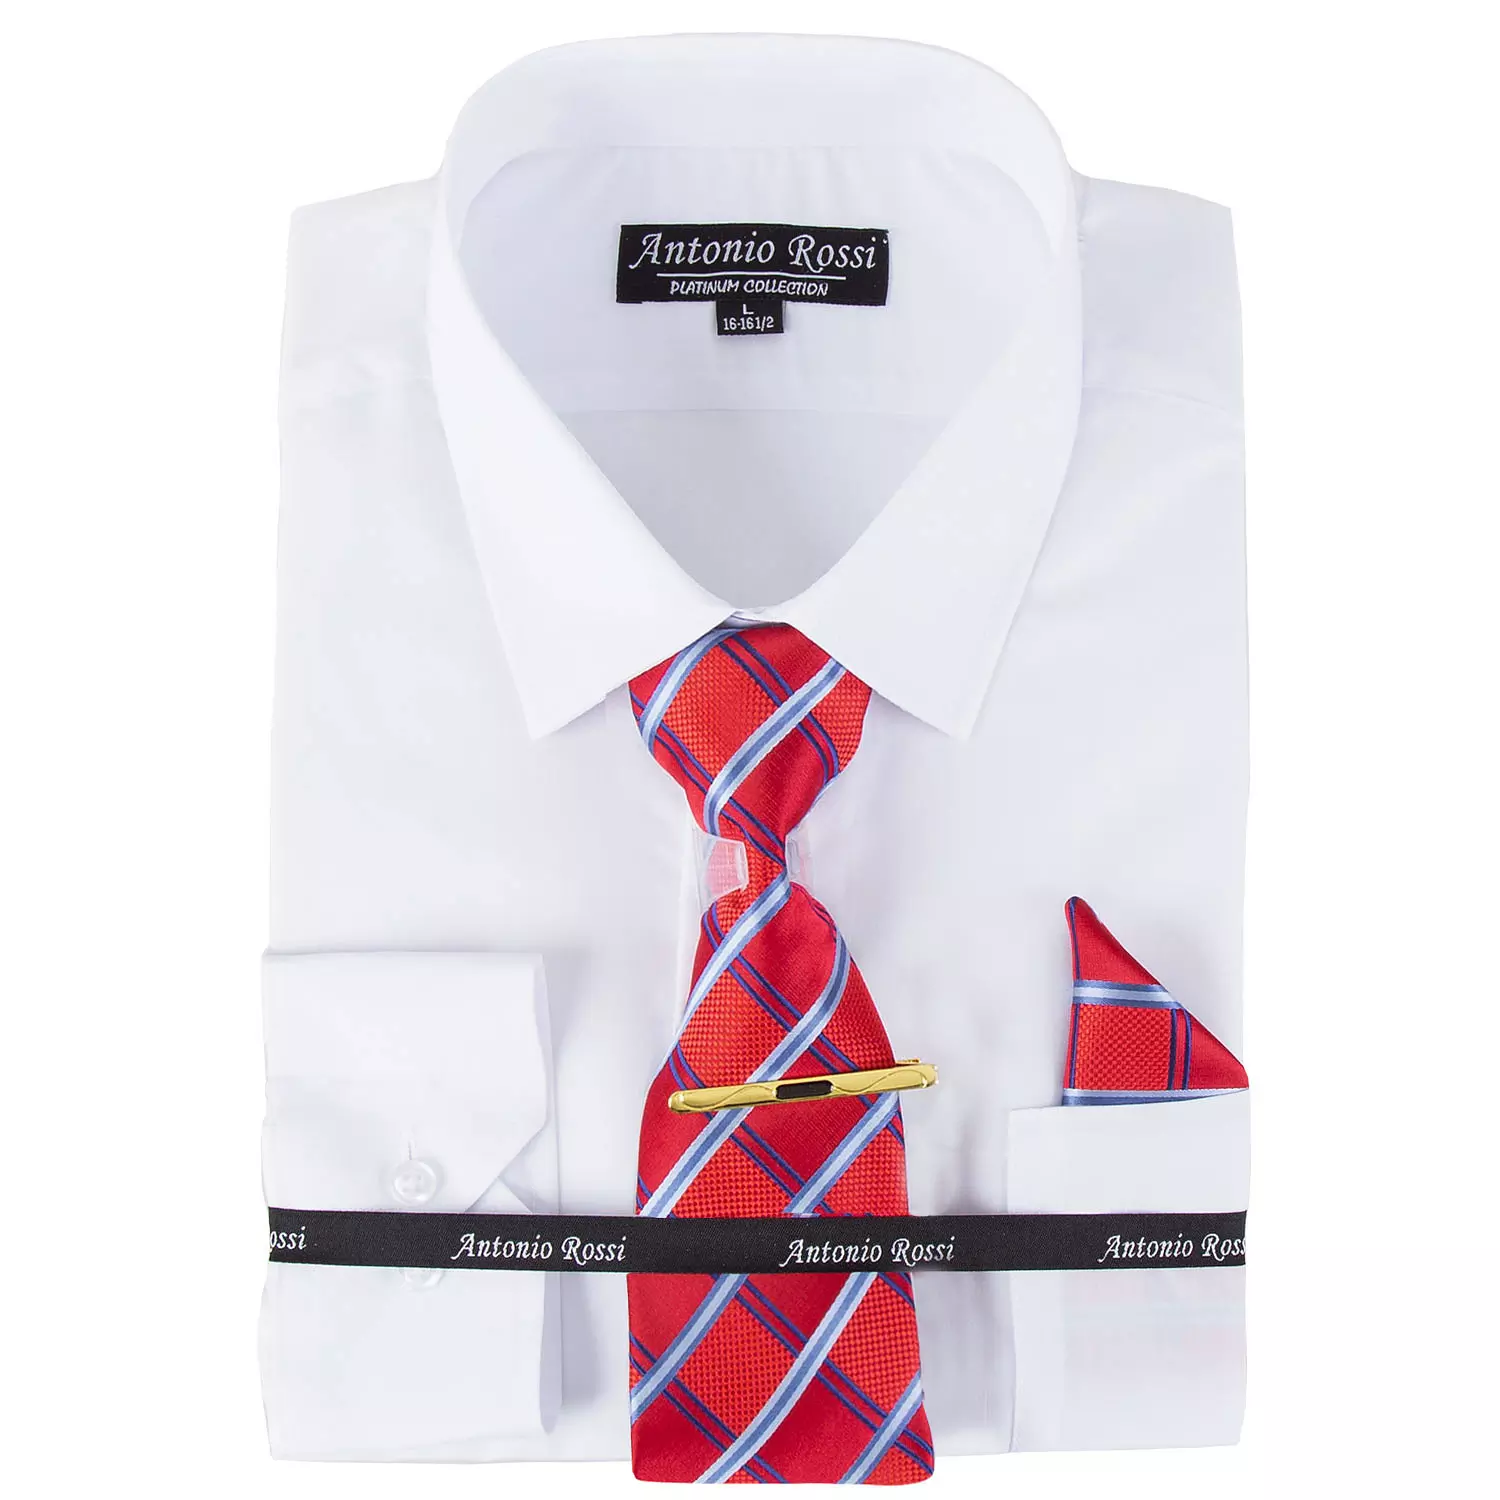 Antonio Rossi - Men's boxed dress shirt with tie, tie clip and hankerchief, white shirt, 16-16.5